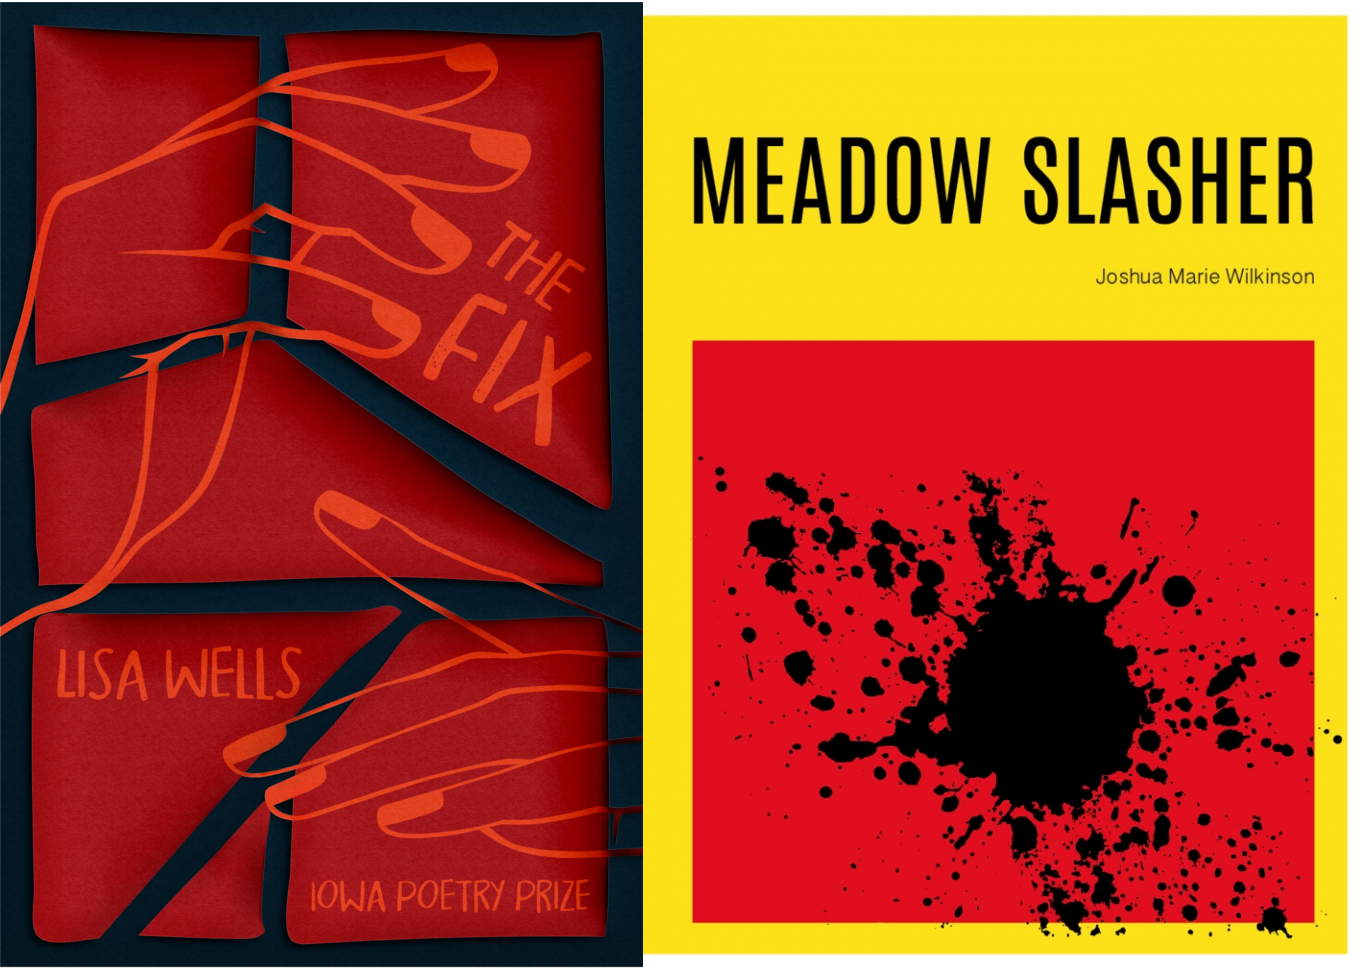 Book Covers for The Fix and Meadow Slasher